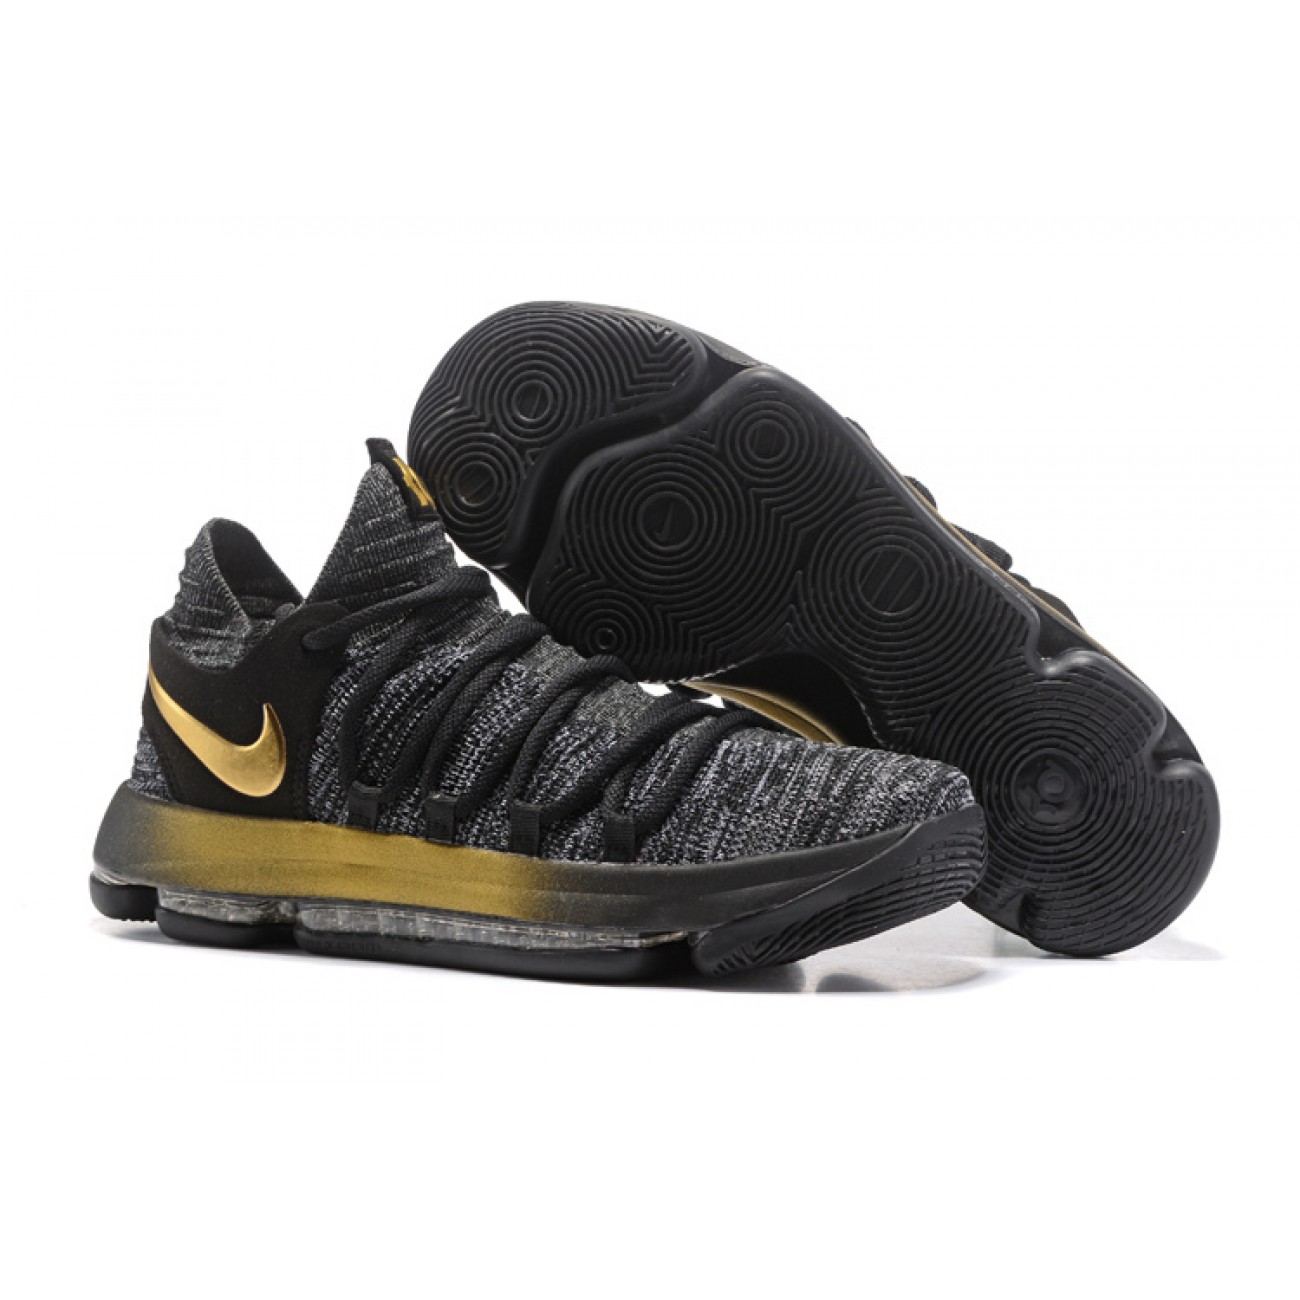 Nike Zoom Kevin Durant KD10 EP Black/Gold